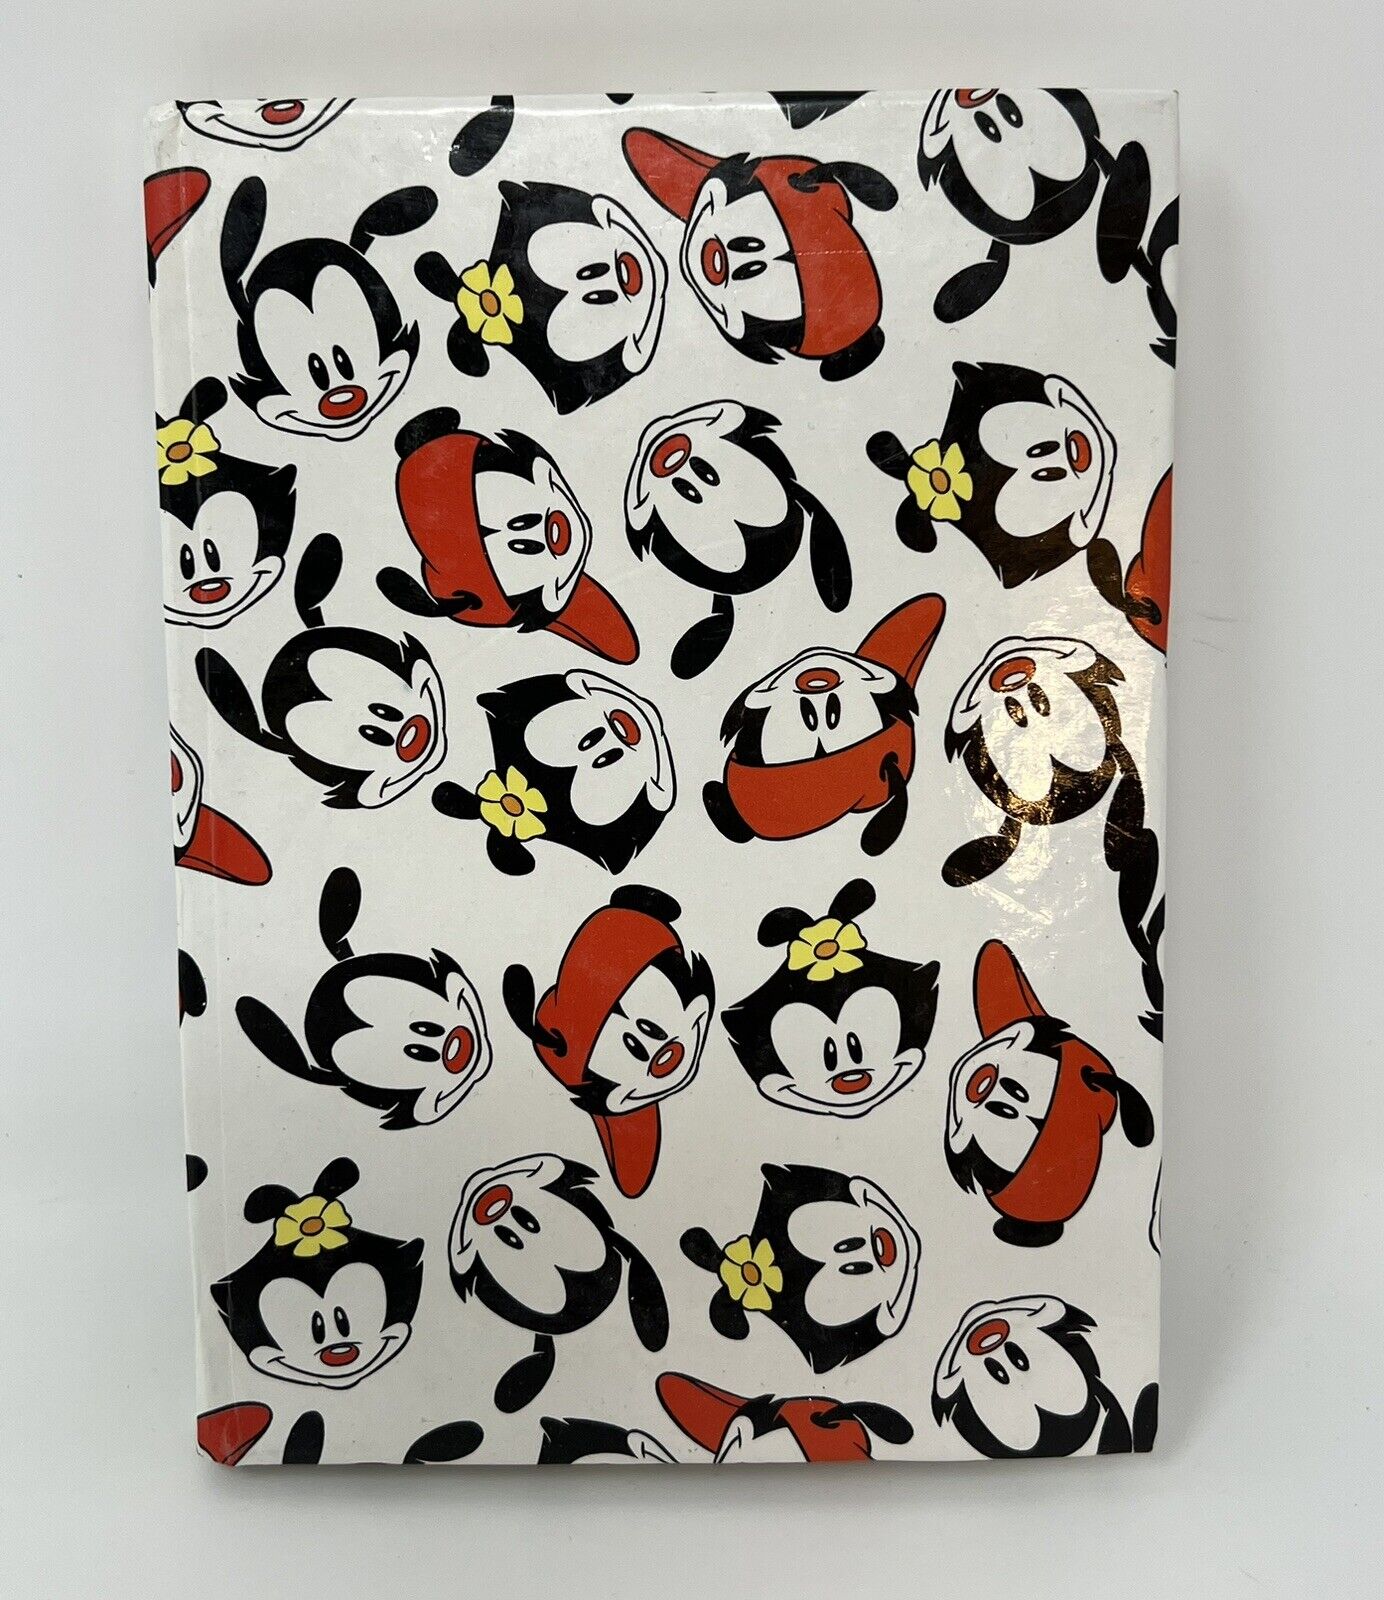 Warners Brothers Animaniacs Phone Address Book Vintage Nostalgia READ DETAILS